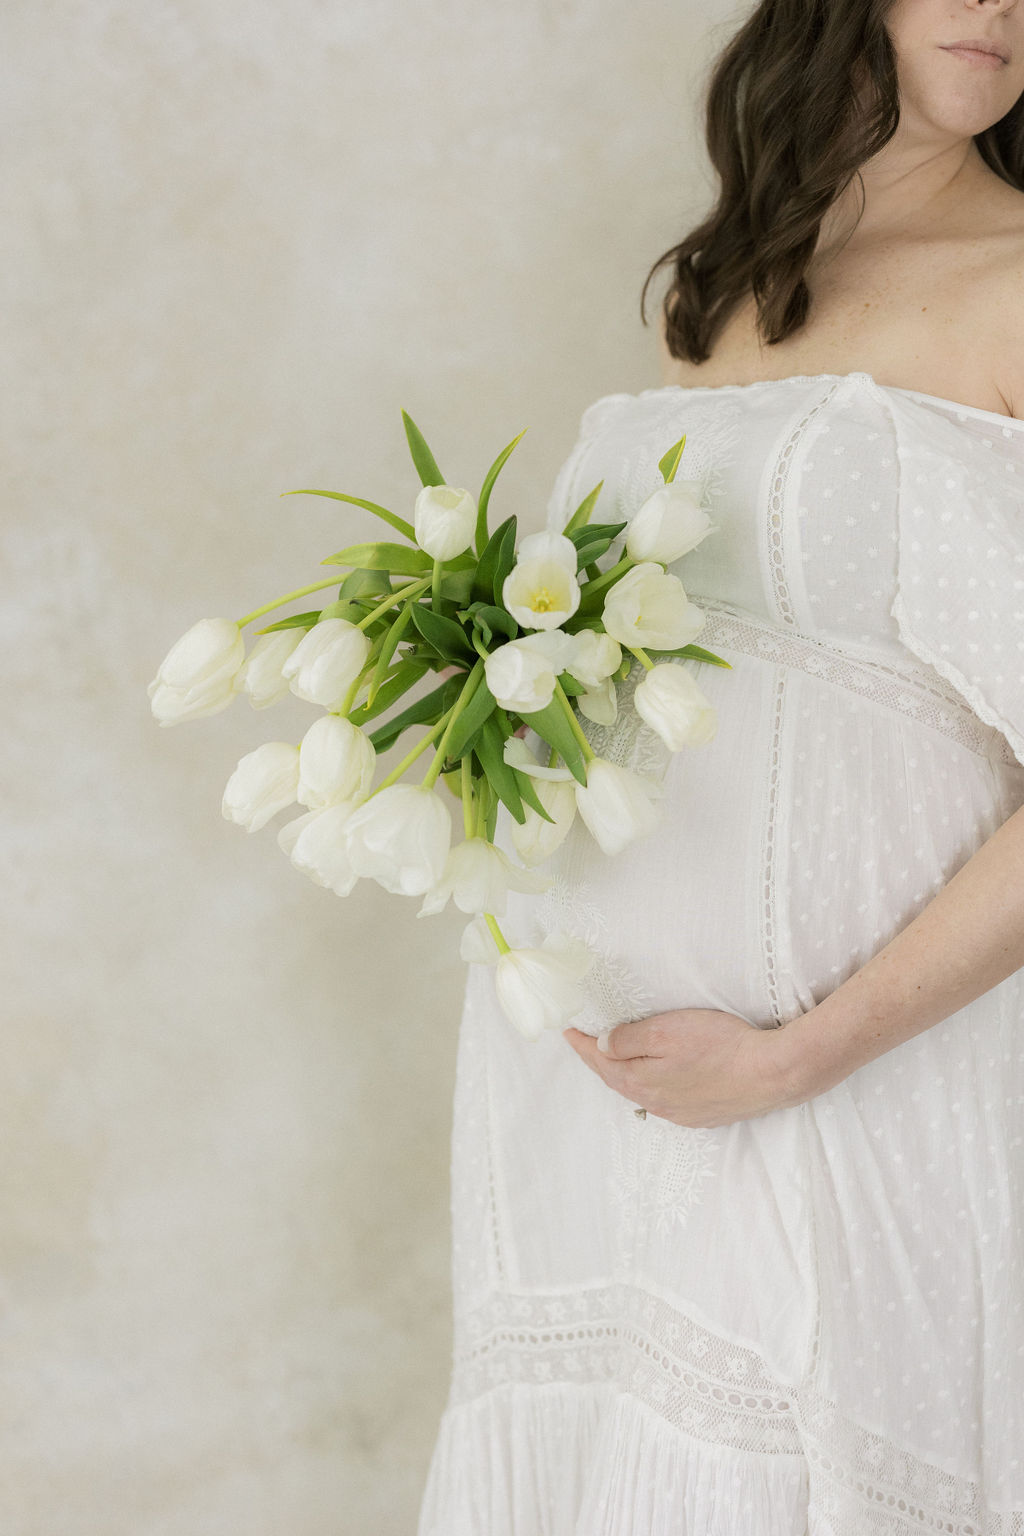 Details of a mother to be holding her bump and white tulips while standing in a studio nj baby shower venues